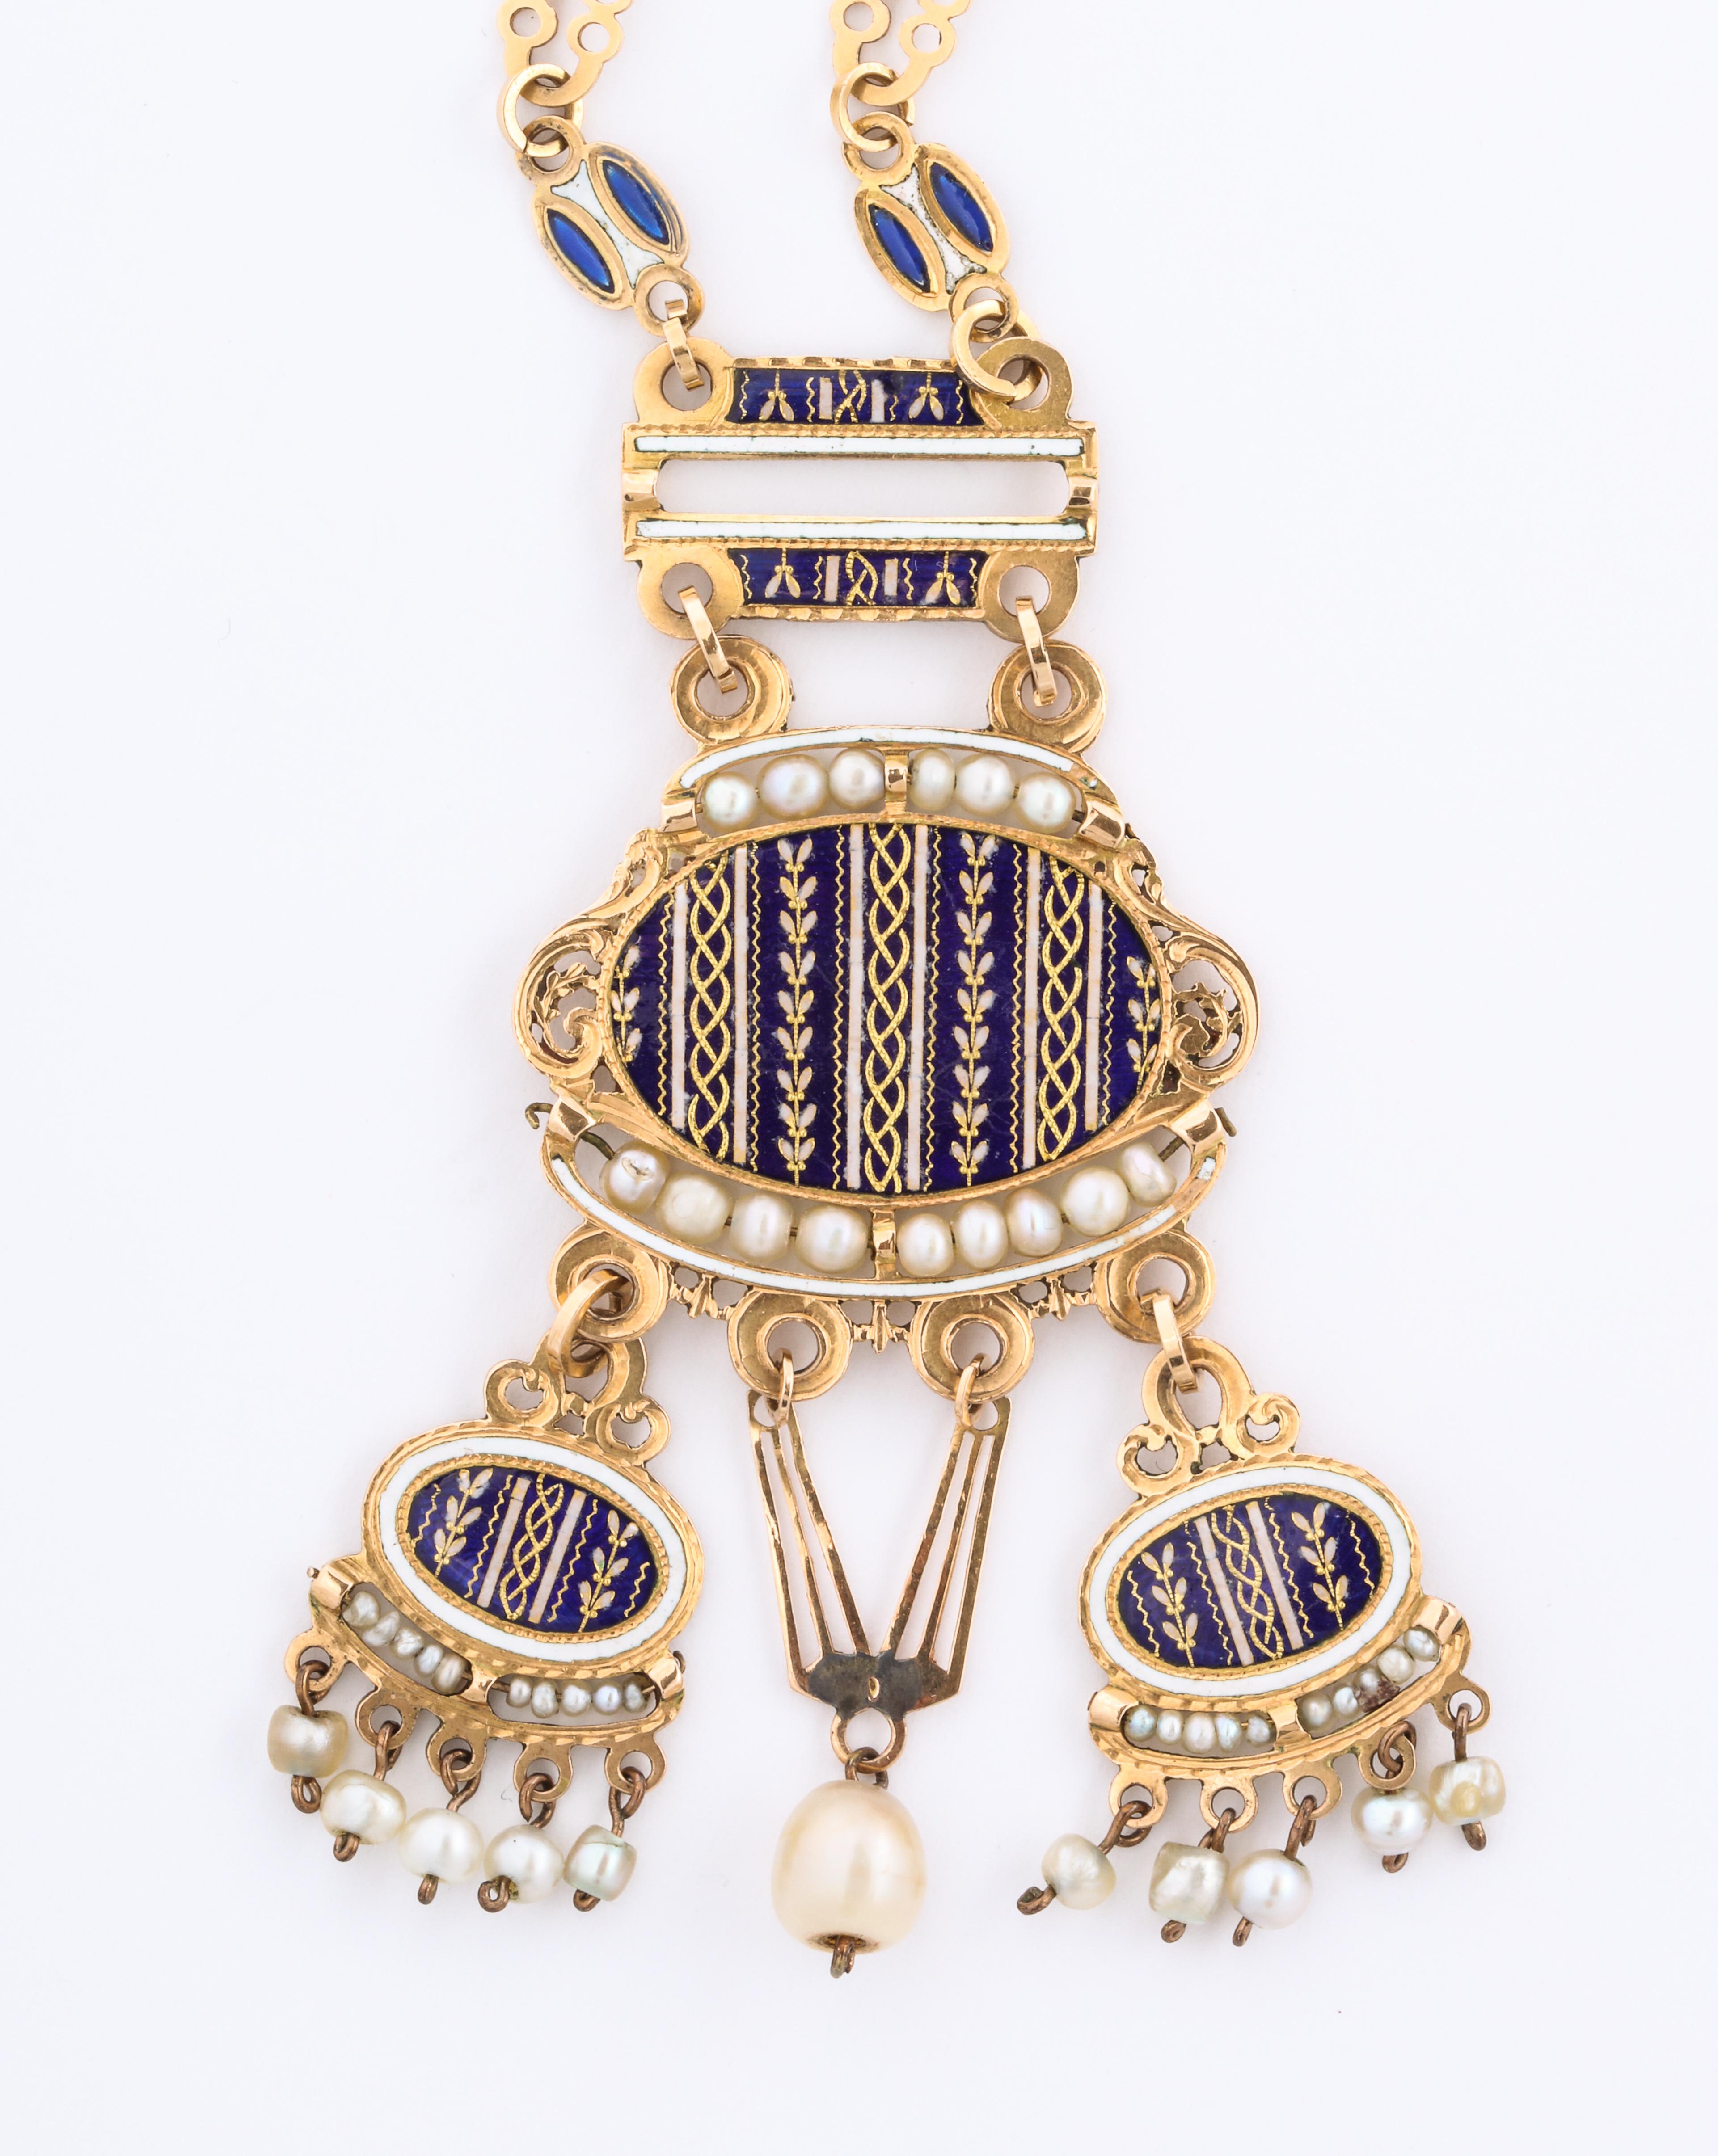 A remarkable and super rare two sided French necklace of 18 kt gold, with enamel and gold  portraits on each side, is in completely original condition.
the necklace is embellished with lustrous natural pearls.  The deep blue landscape on one side